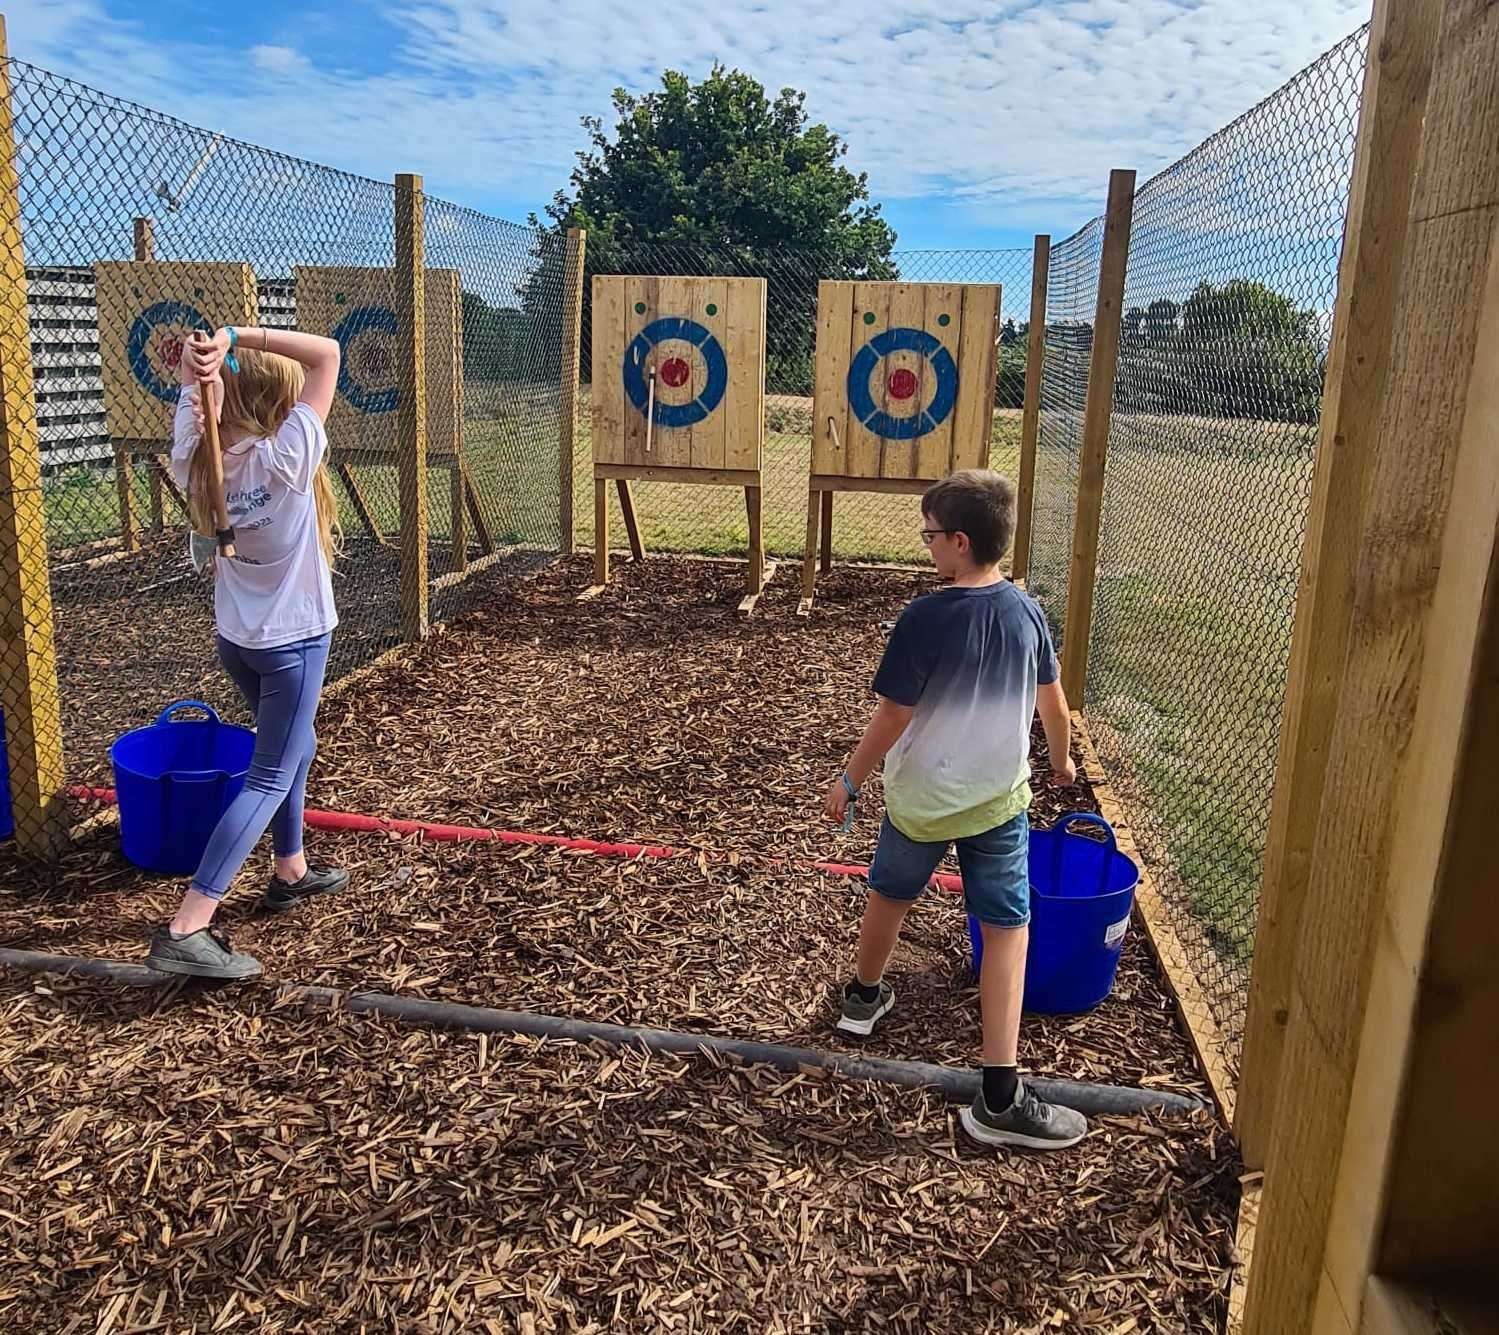 Just two kids throwing axes - nothing to see here